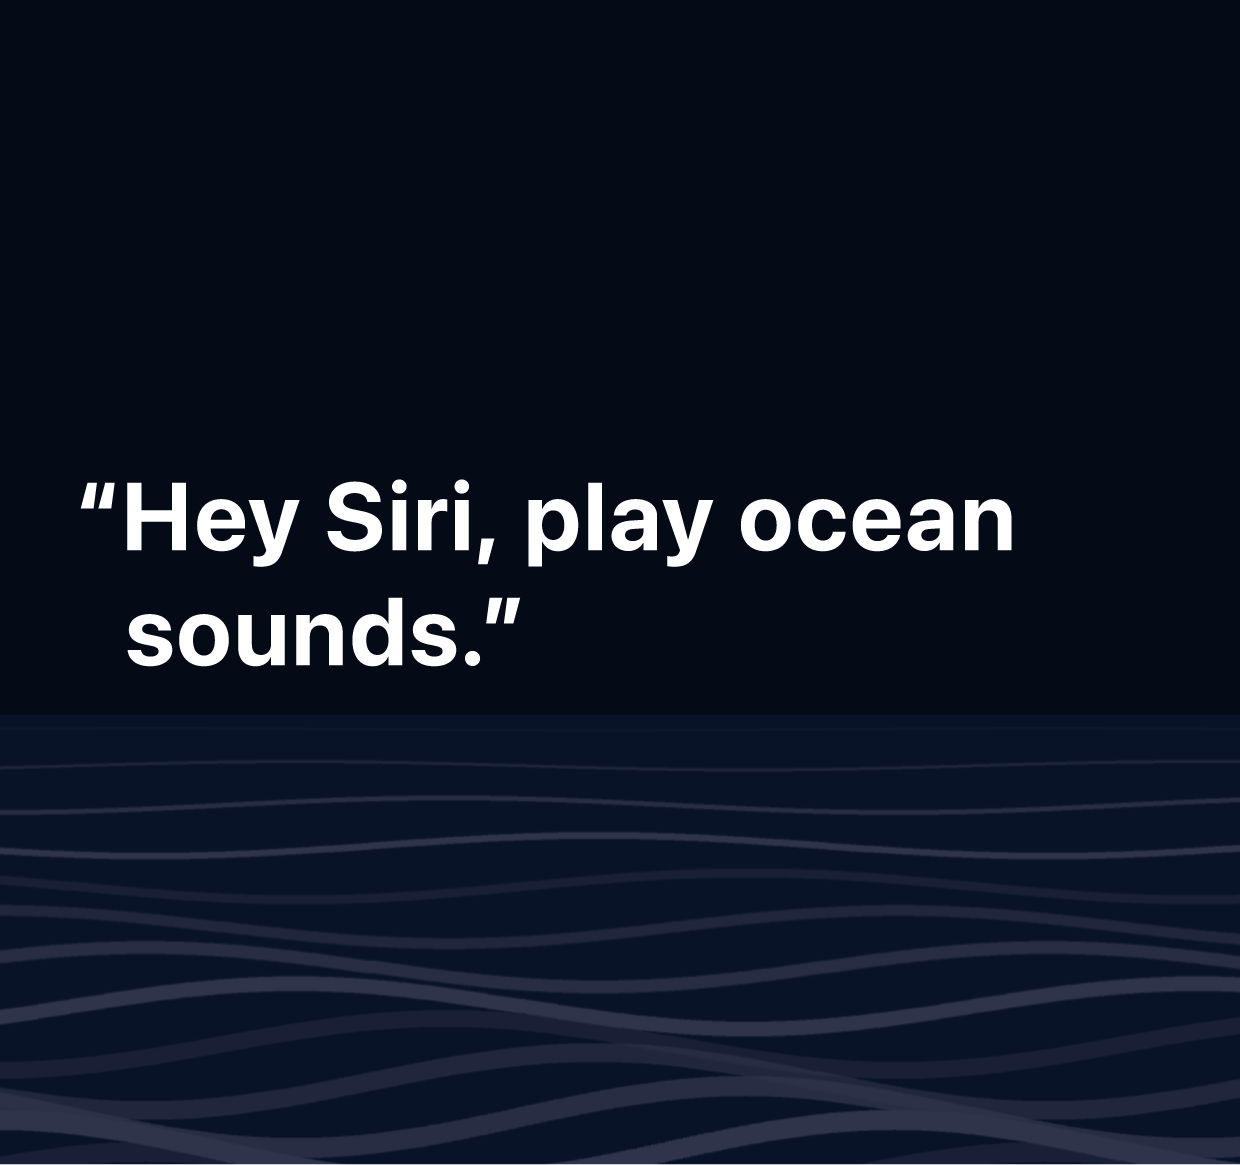 An illustration of the words “Hey Siri, play ocean sounds”.